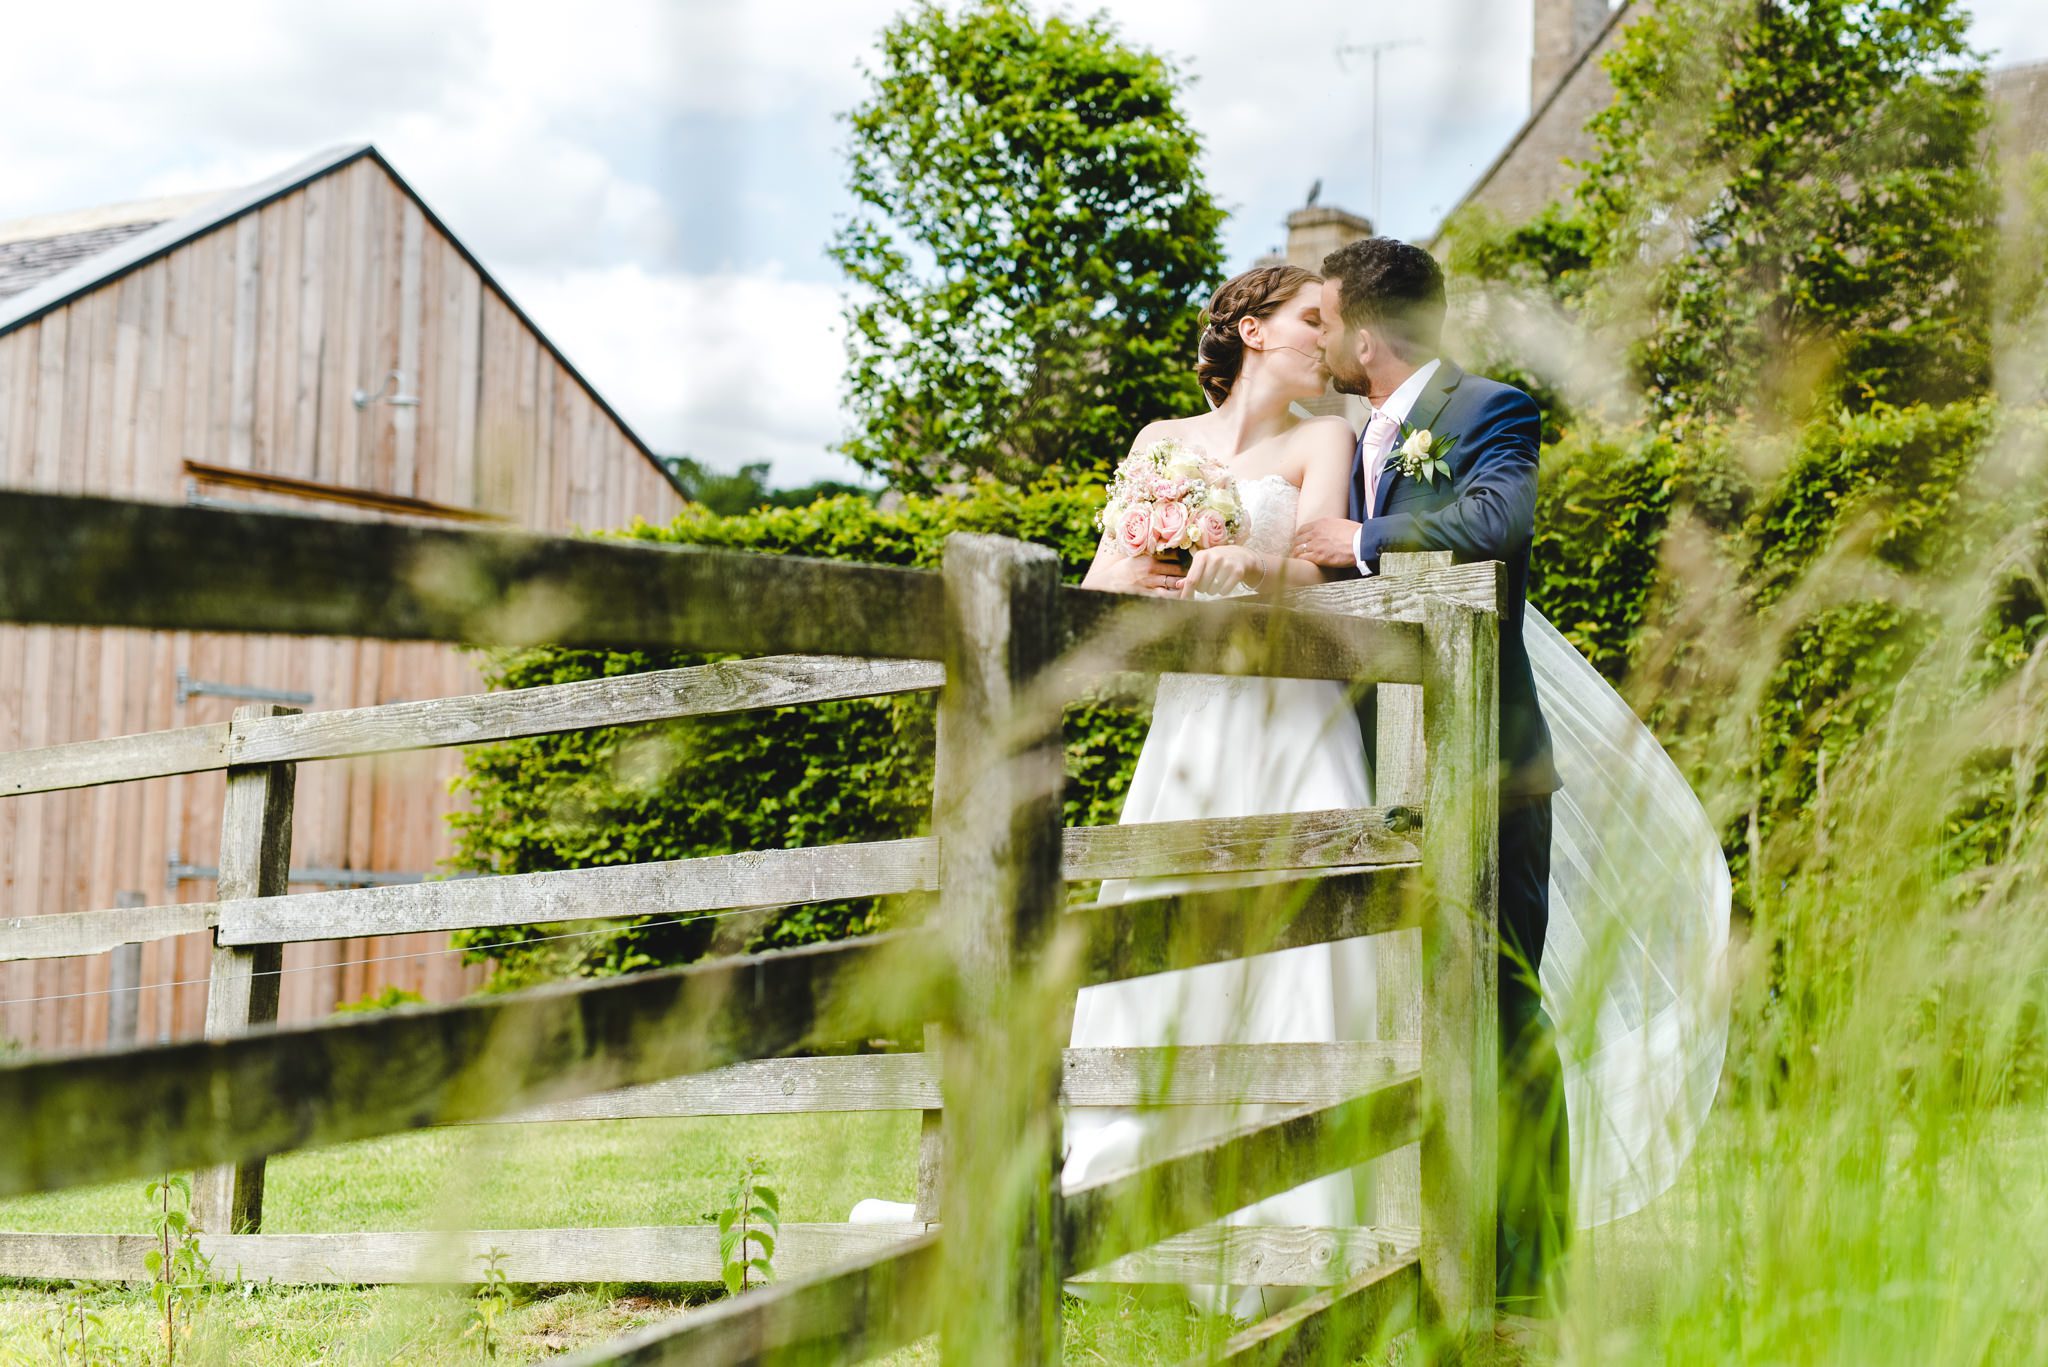 Beautiful wedding pictures at Hyde Barn